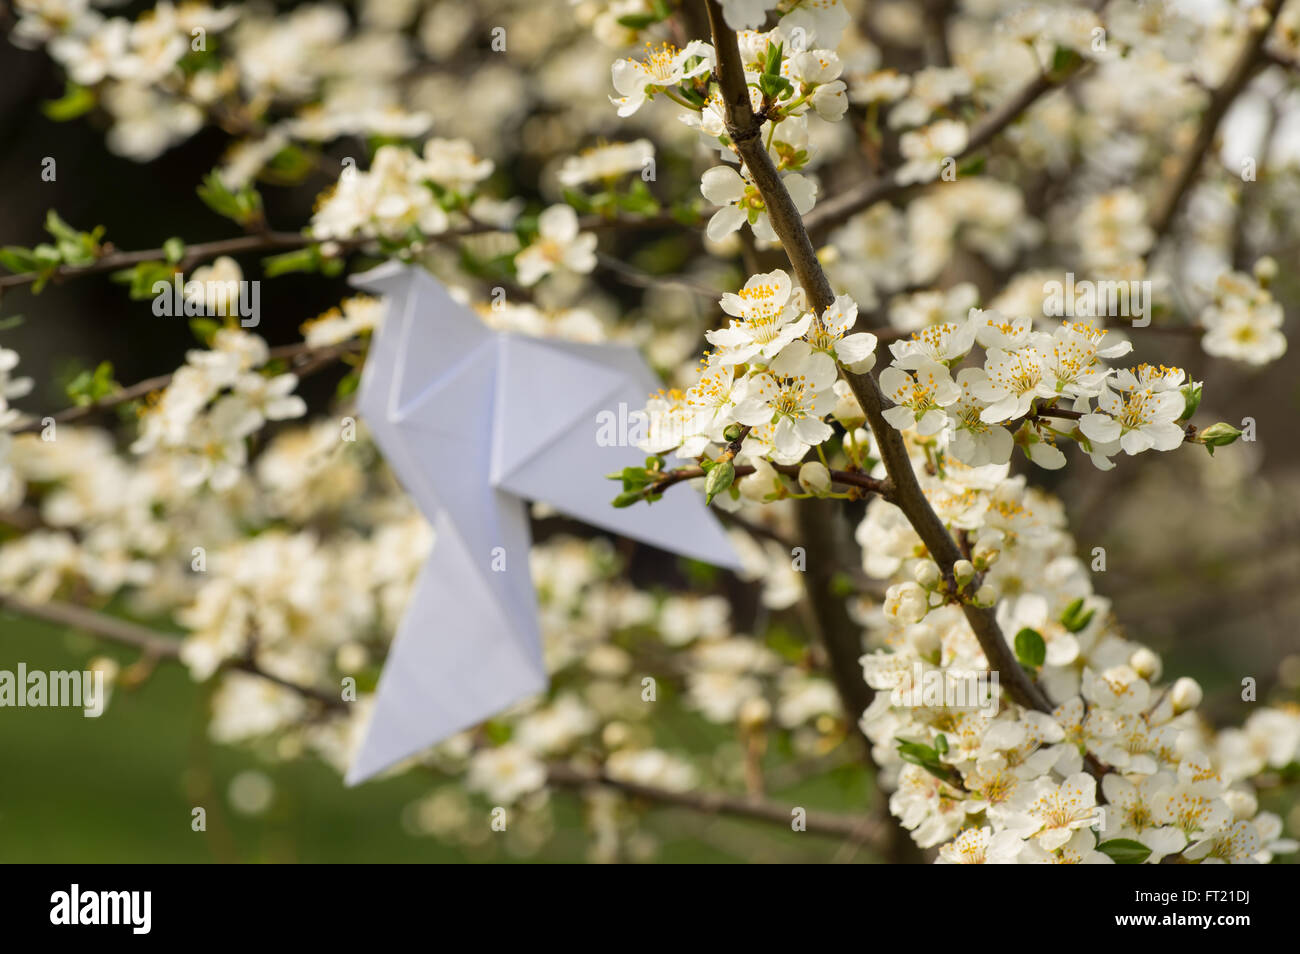 White origami dove bird hanging on blooming spring plum tree with variable focus Stock Photo